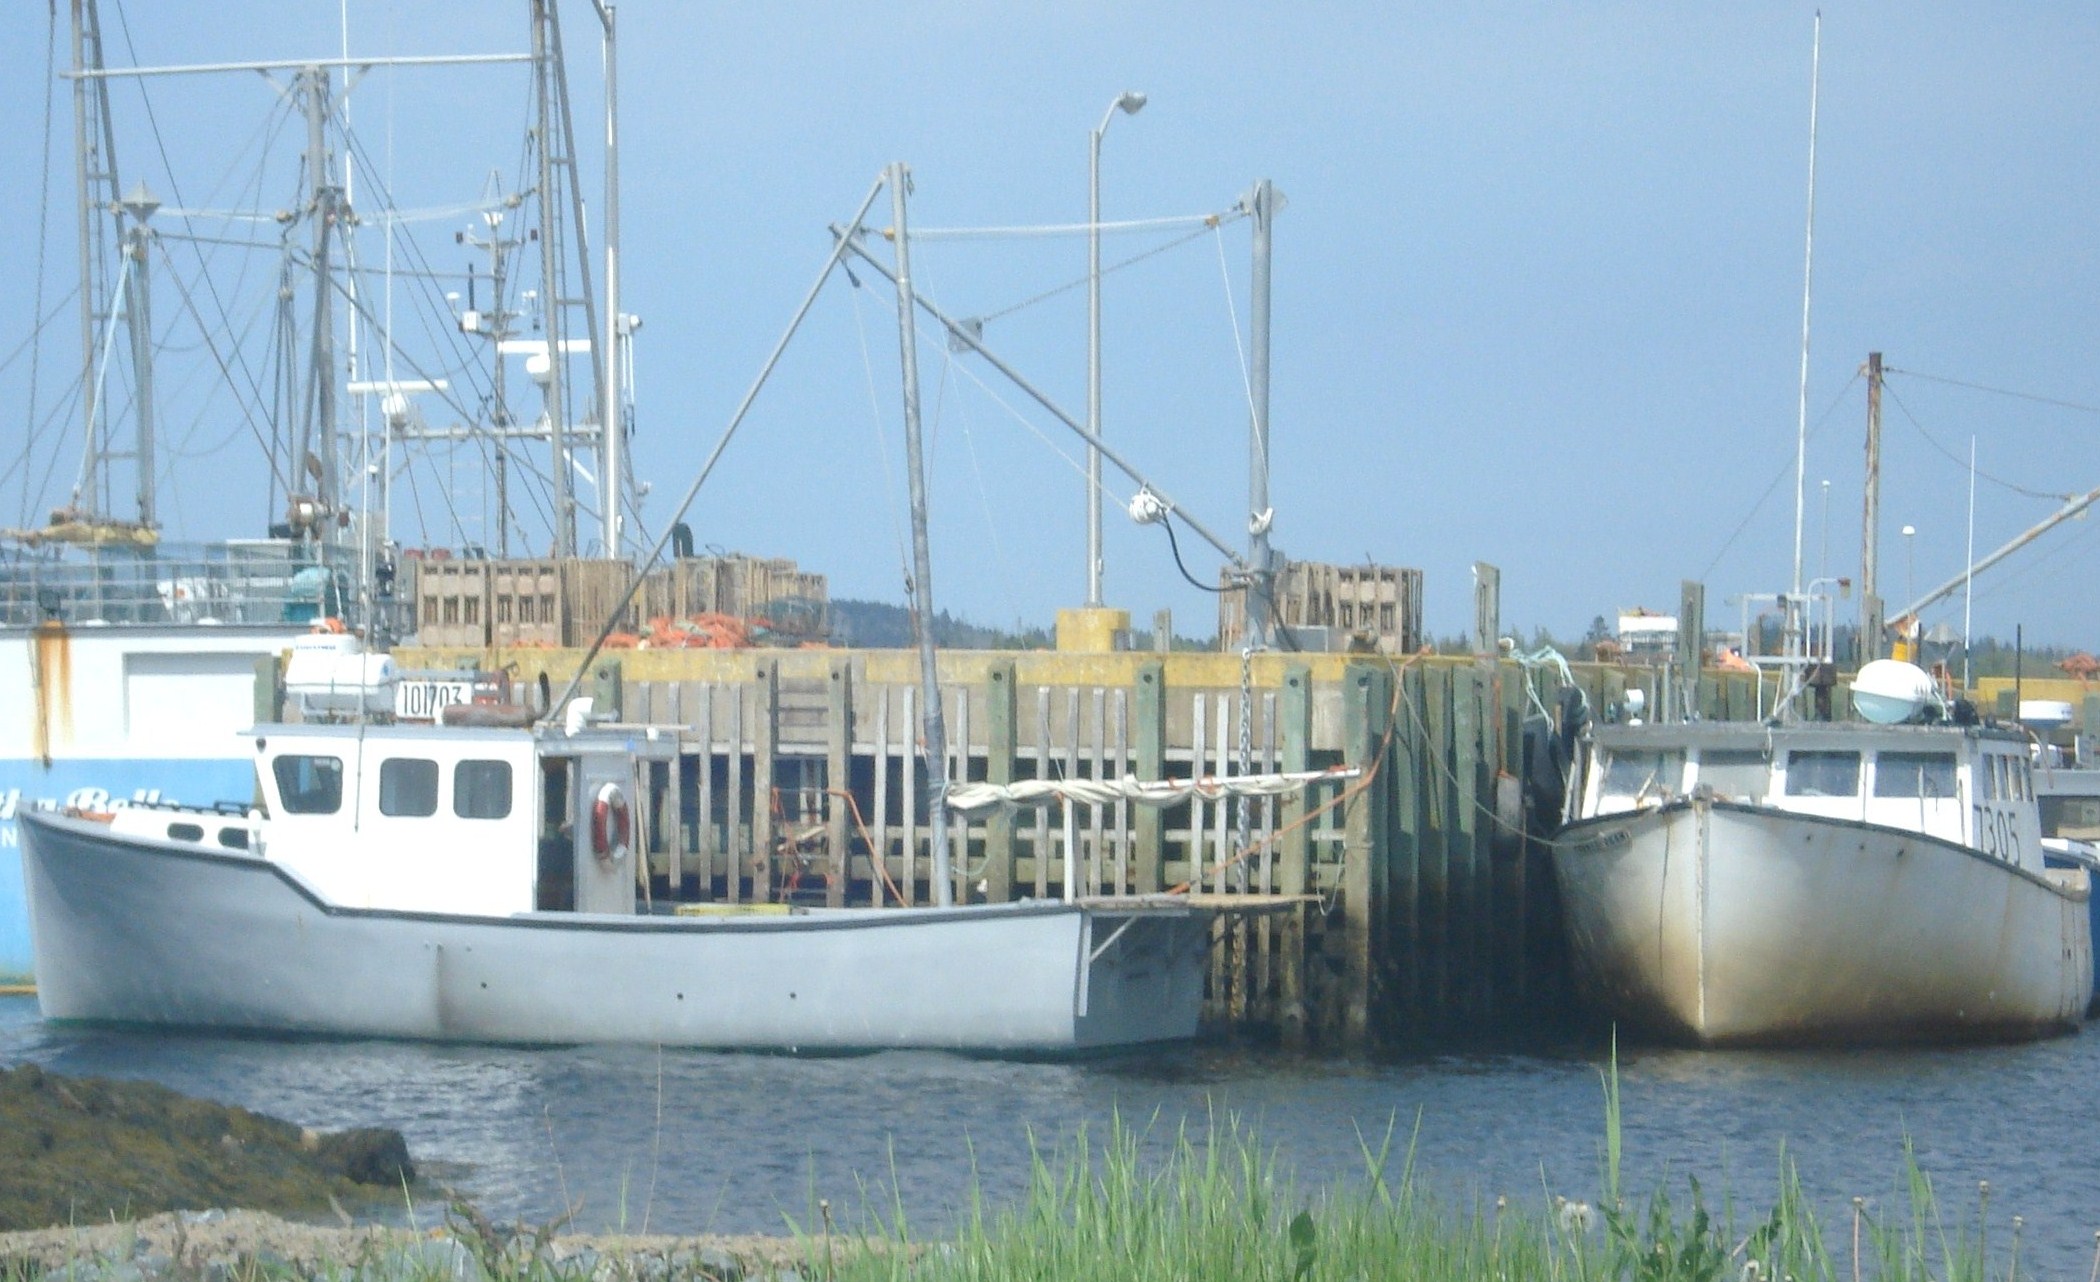 boats docked at a harbor near an industrial area